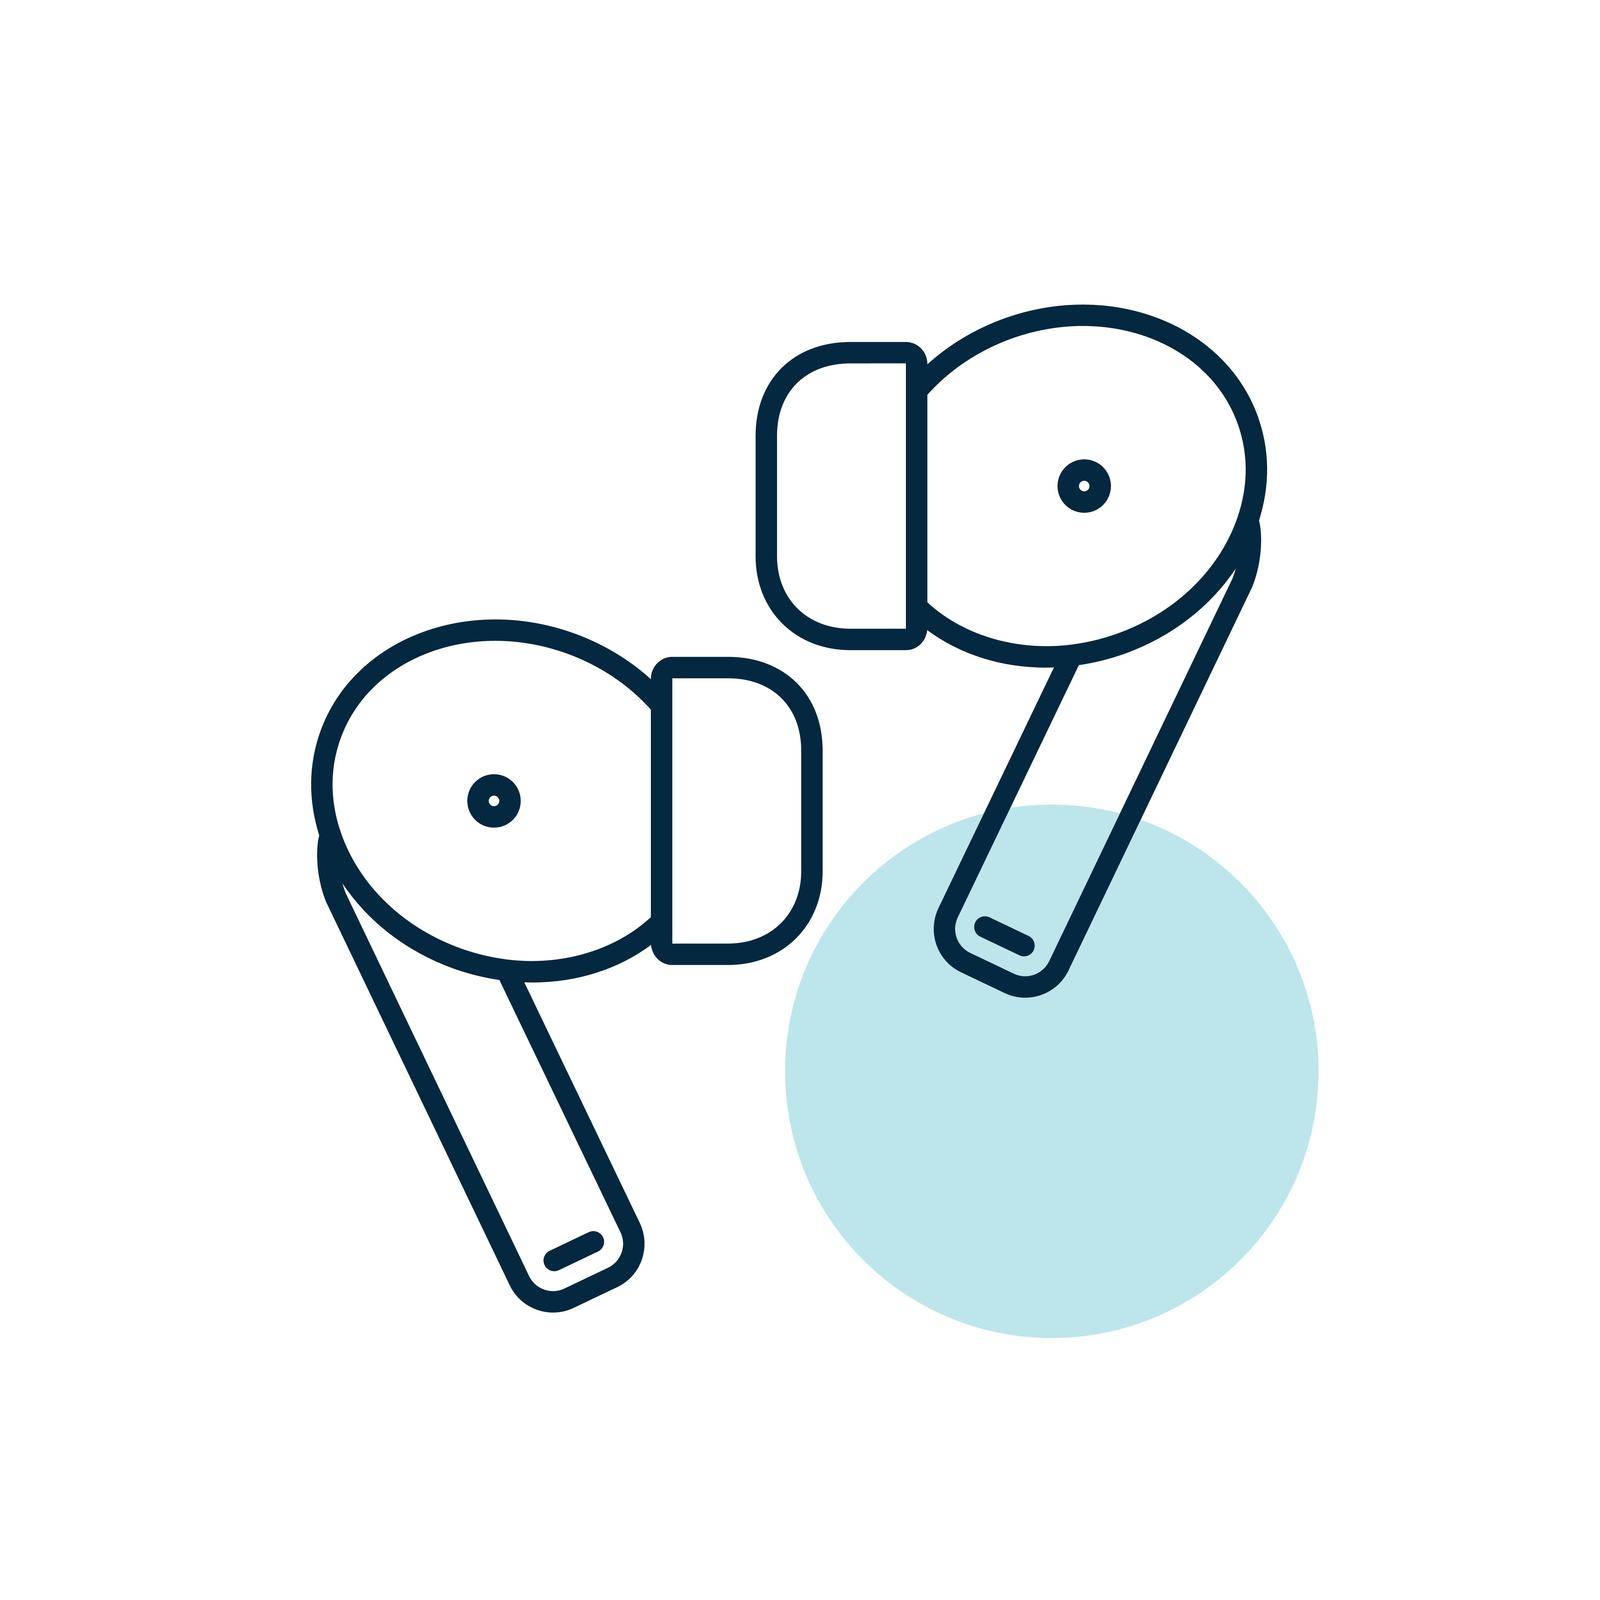 Pair of wireless earbud headphones vector icon by nosik